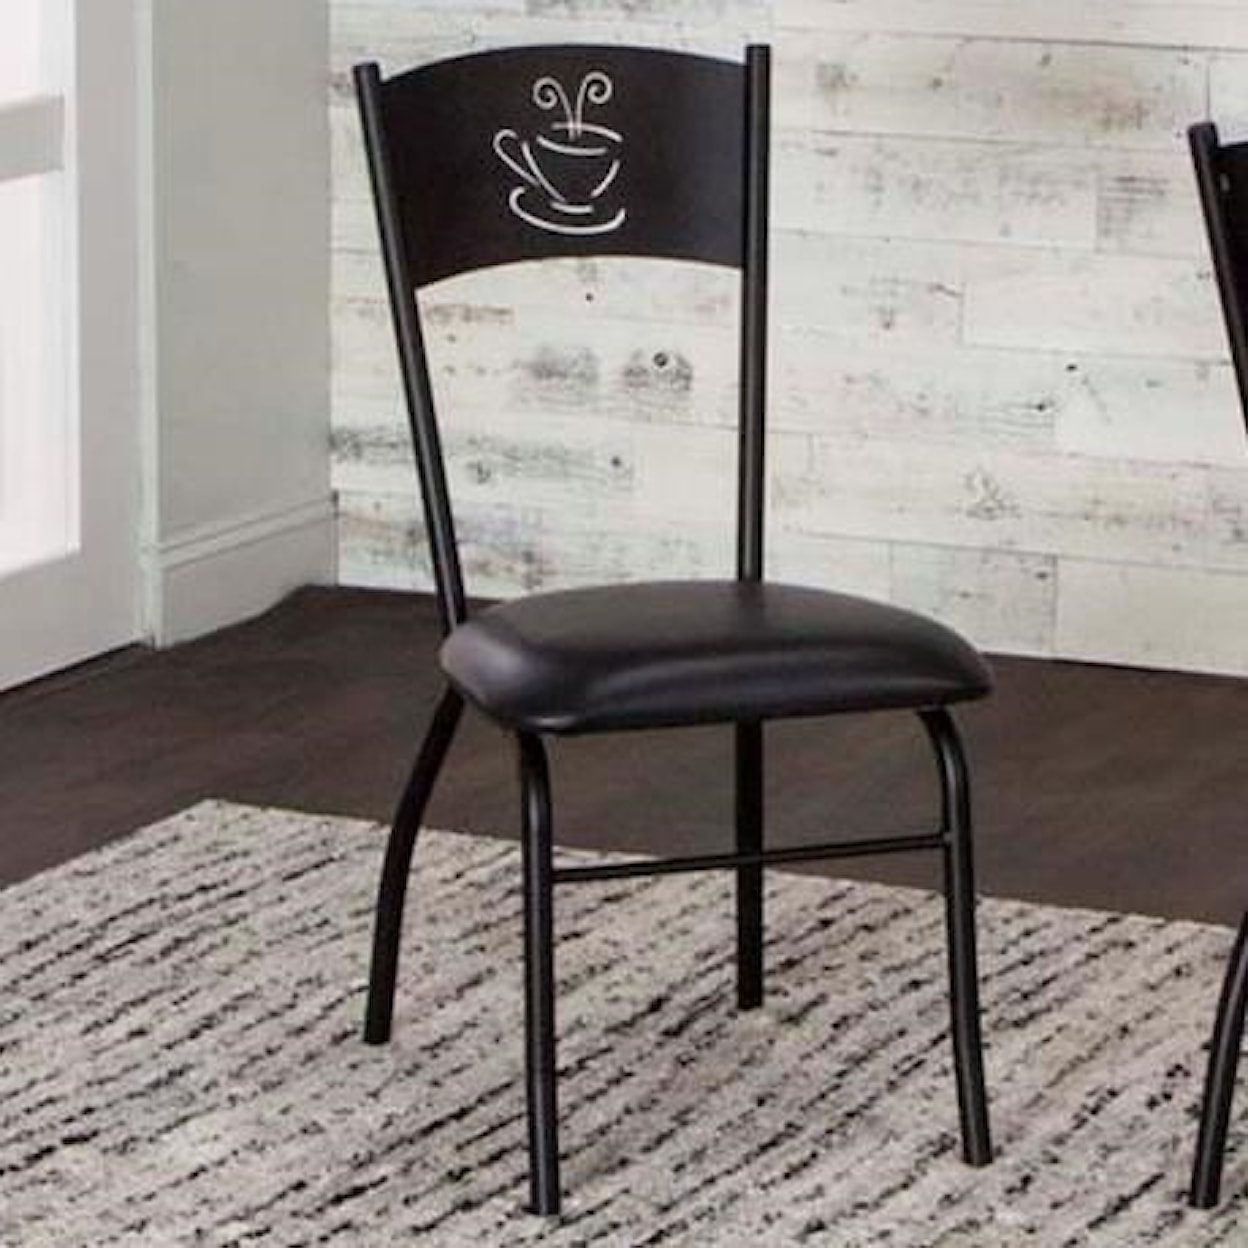 Cramco, Inc Nero 3-Piece Table and Chair Set